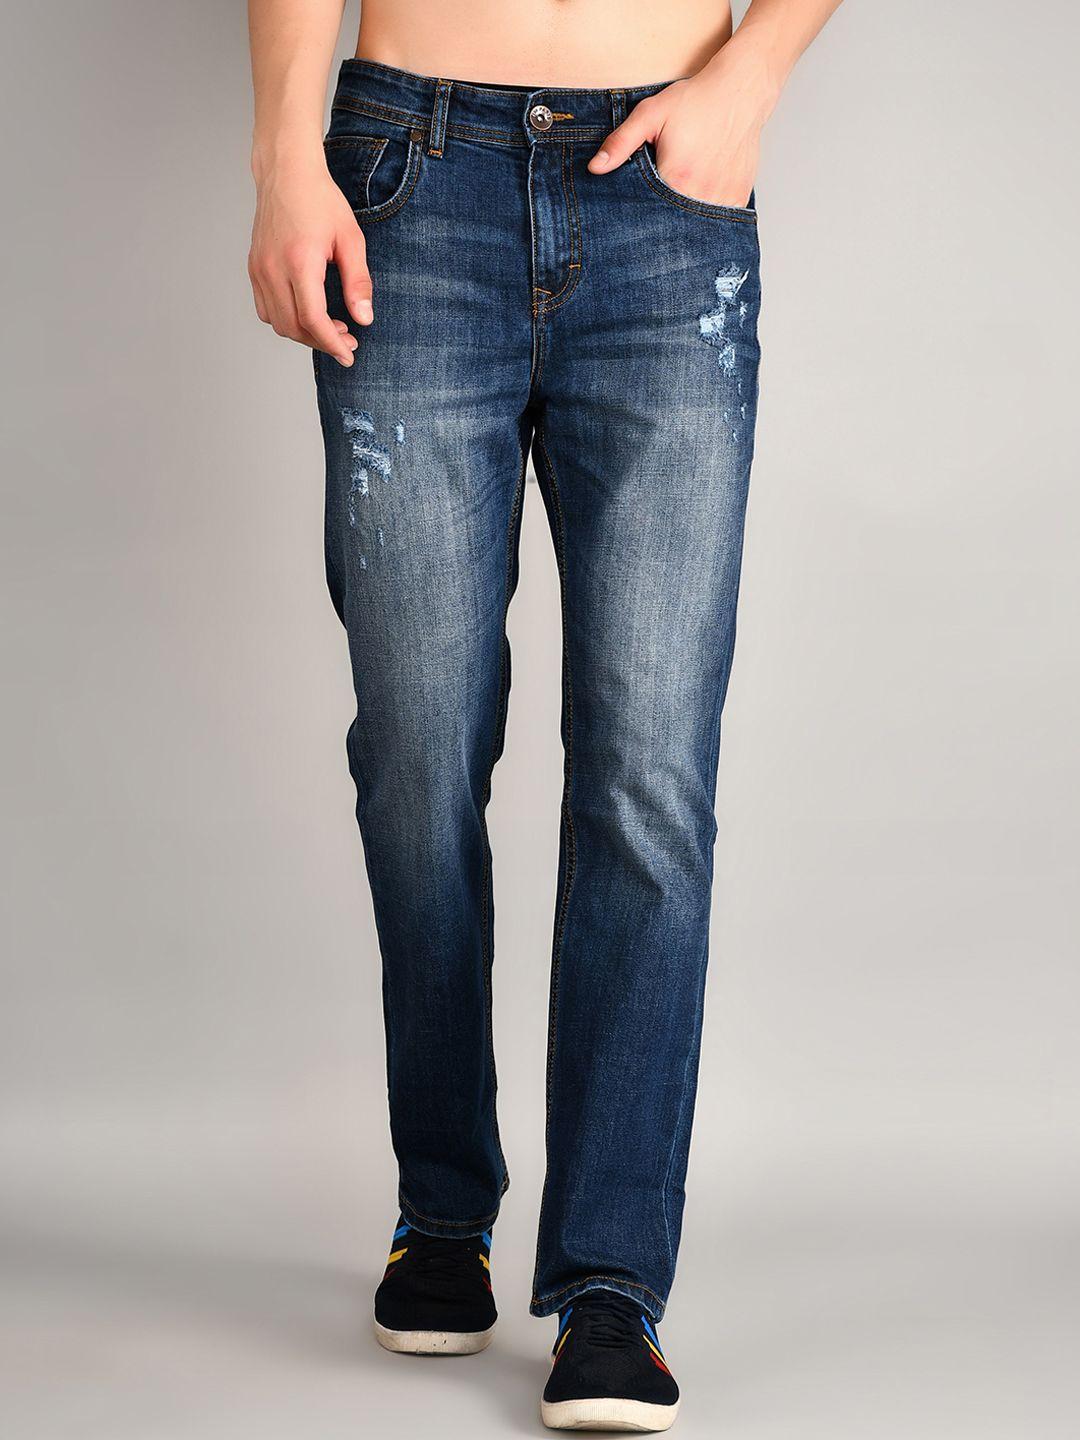 tim-paris-men-low-distress-whiskers-&-chevrons-cotton-relaxed-fit-stretchable-jeans